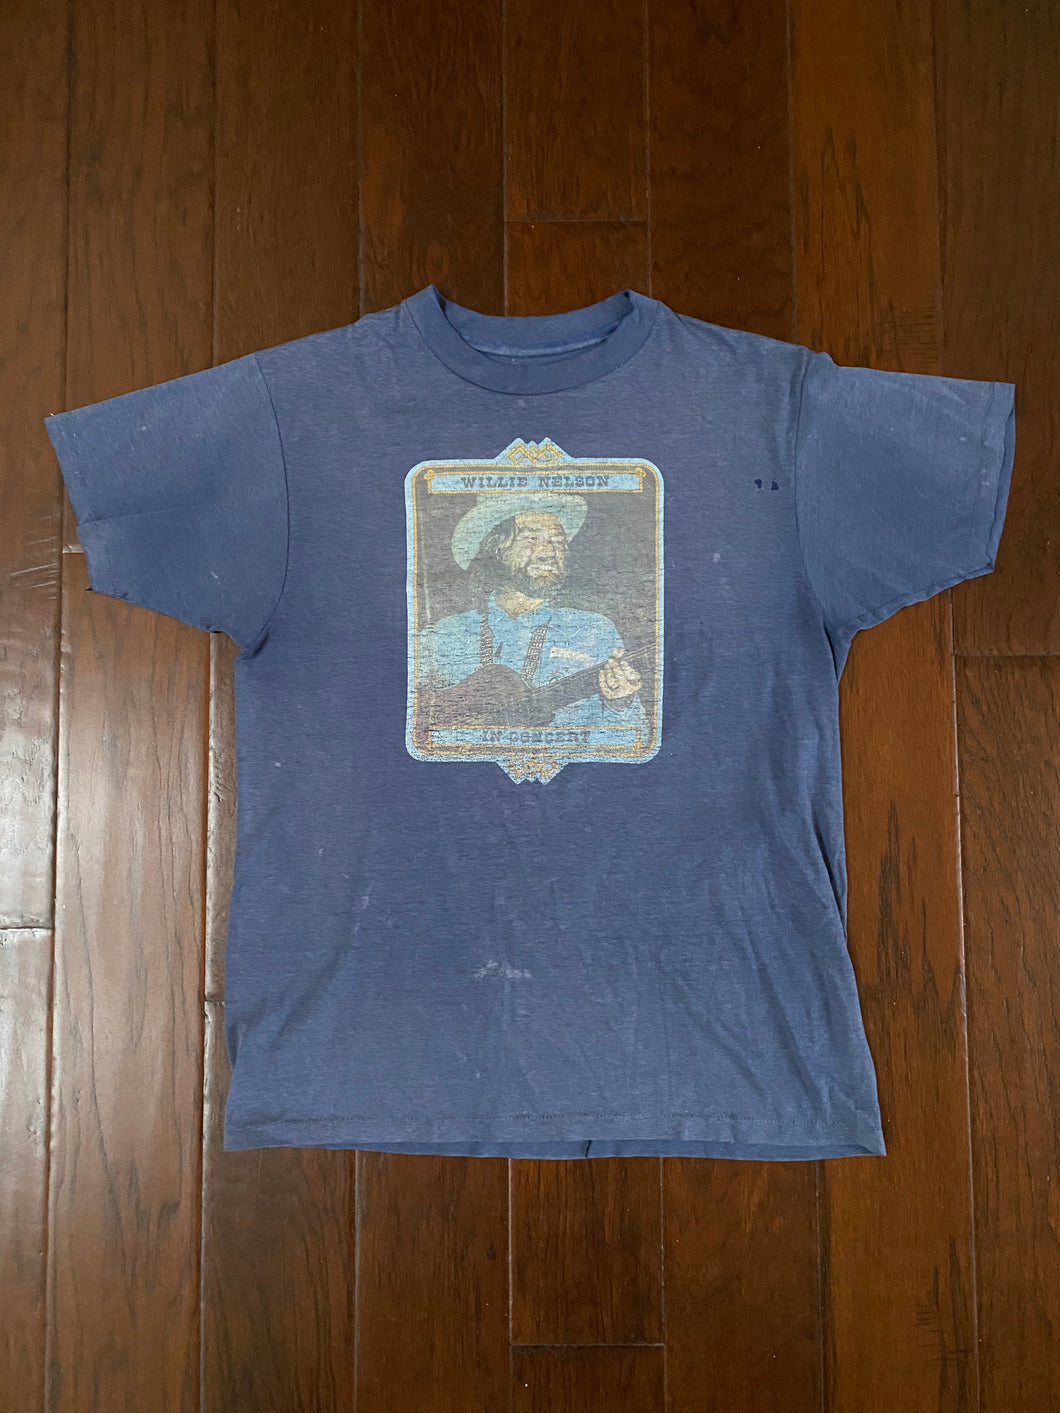 Willie Nelson 1980’s Incredible Thin Vintage Distressed T-shirt